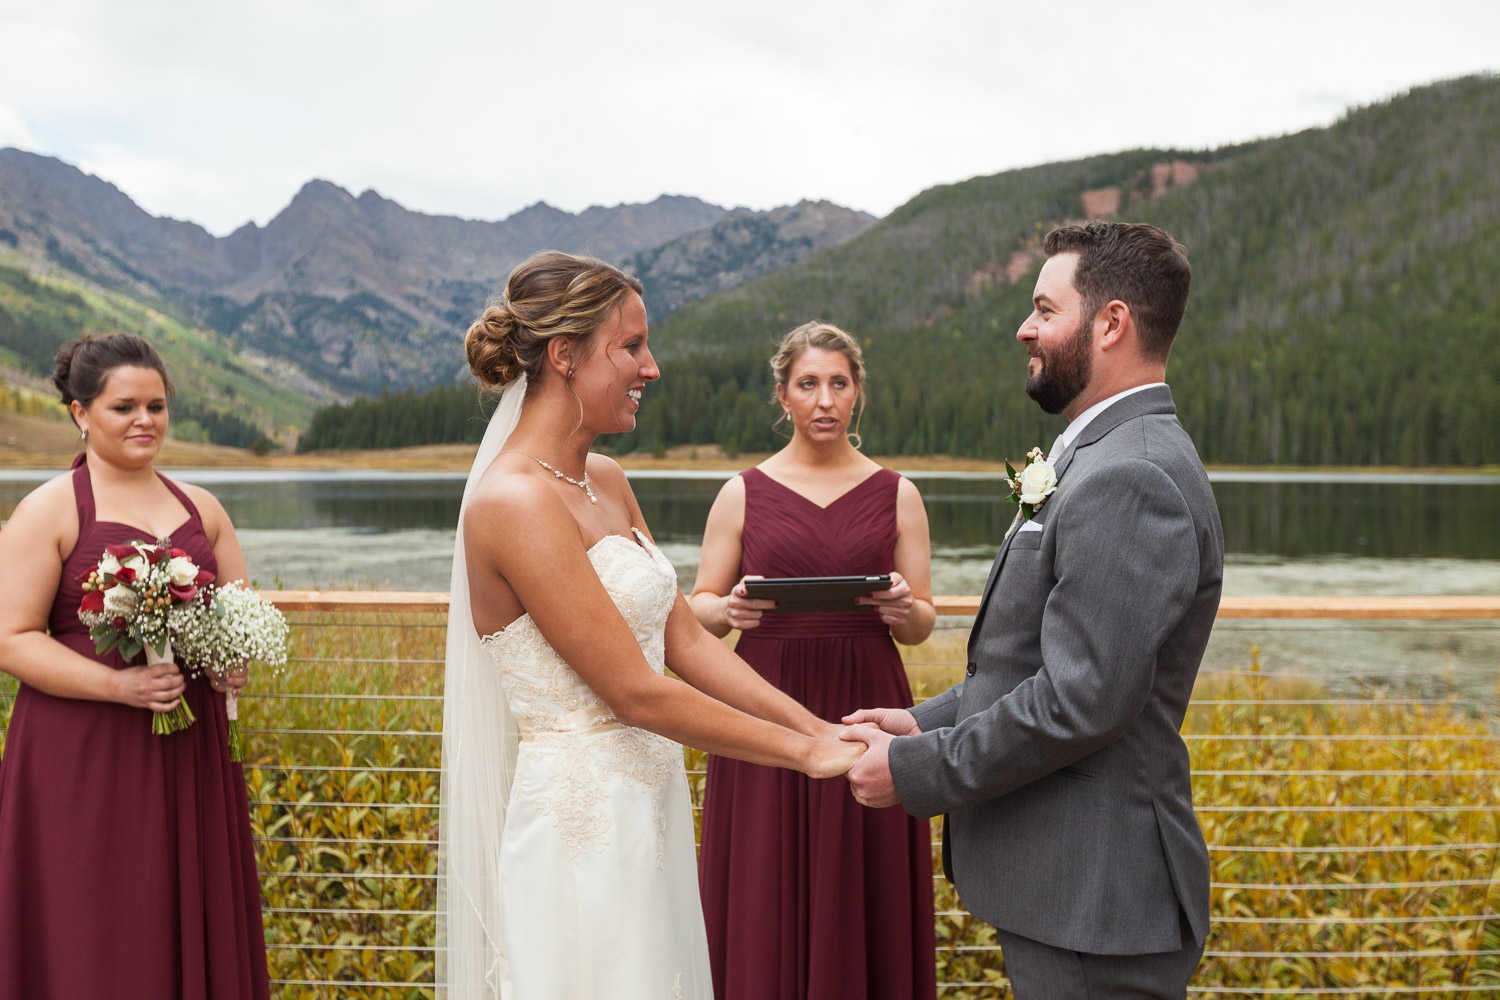 Piney River Ranch Wedding Ceremony on Deck